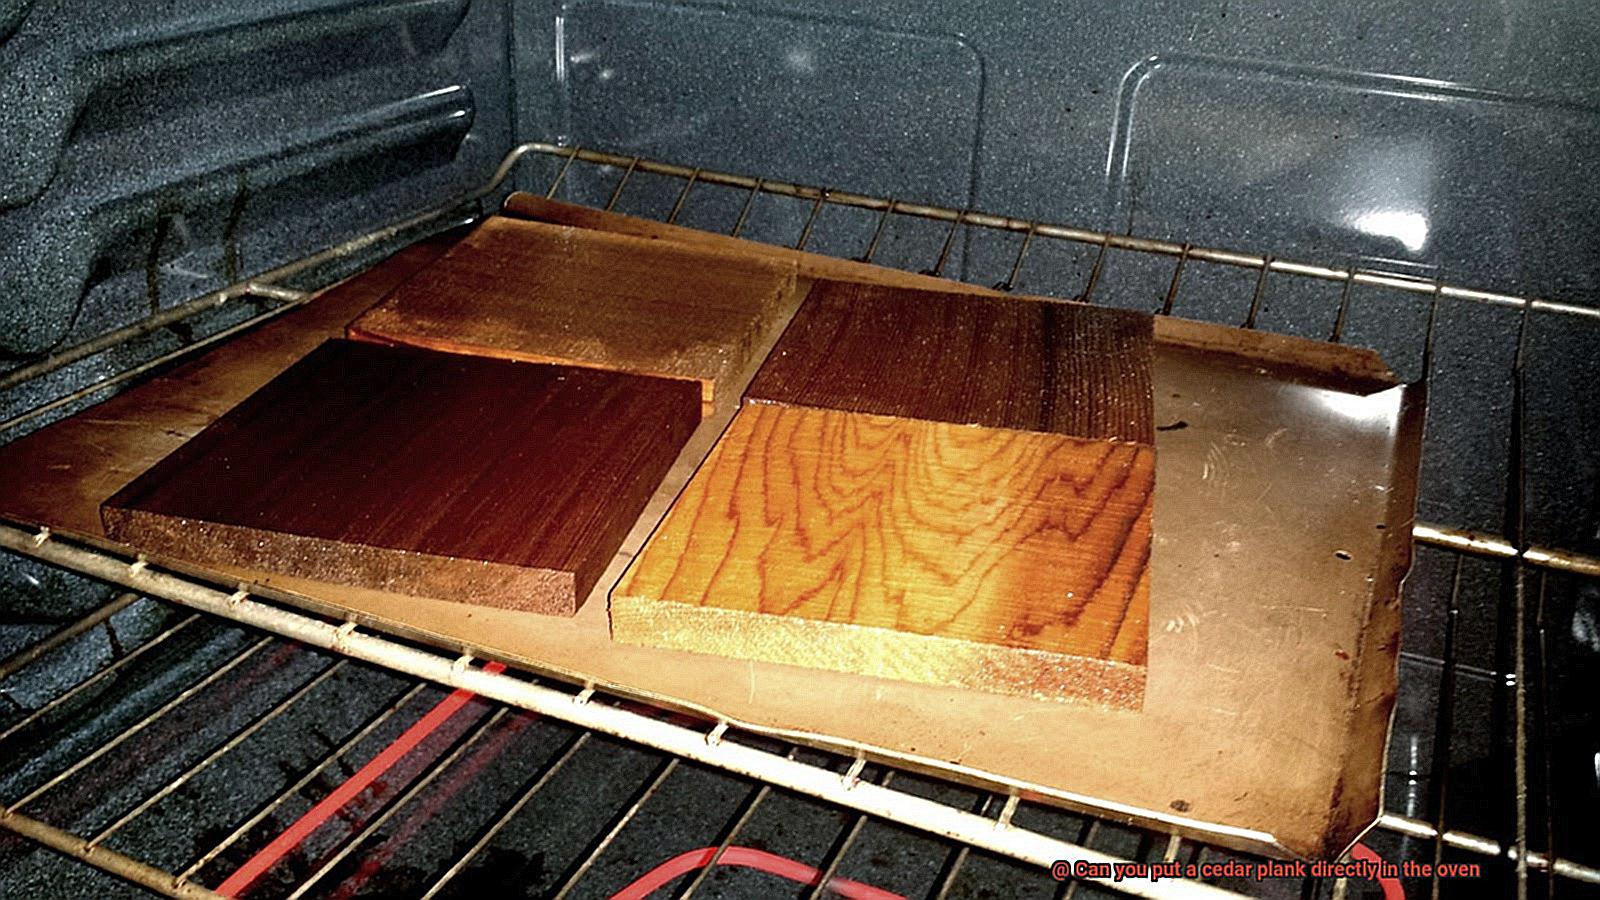 Can you put a cedar plank directly in the oven-5